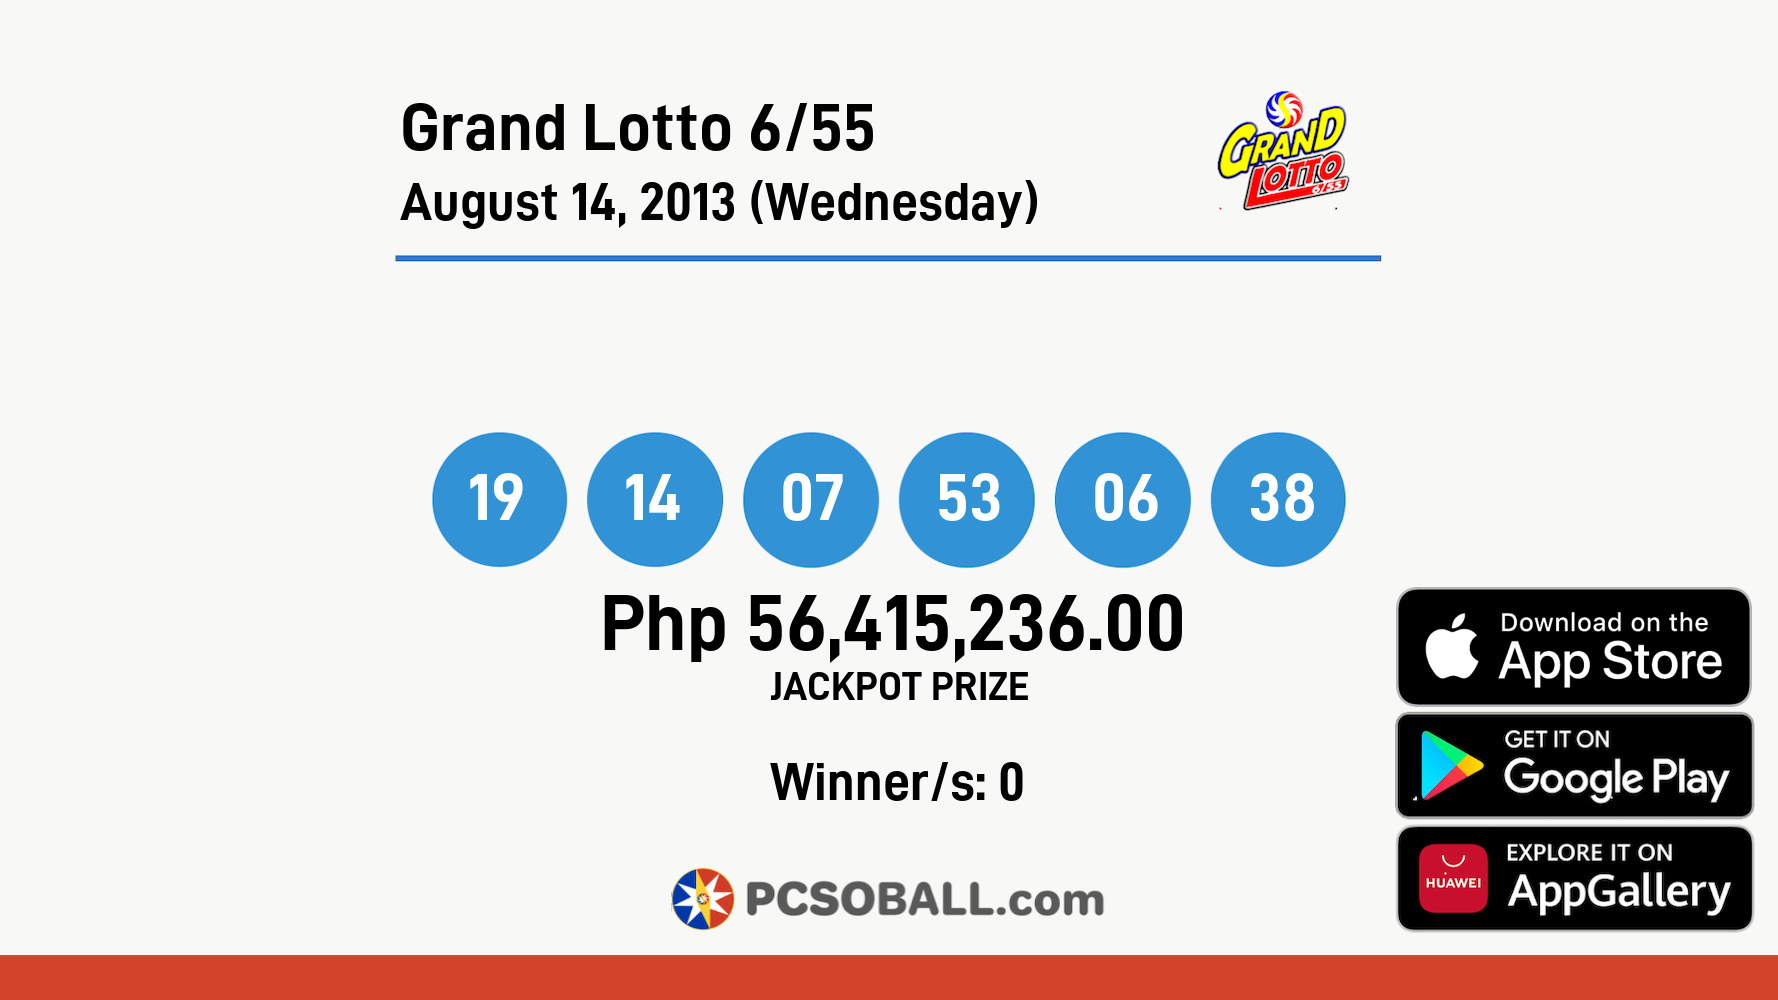 Grand Lotto 6/55 August 14, 2013 (Wednesday) Result